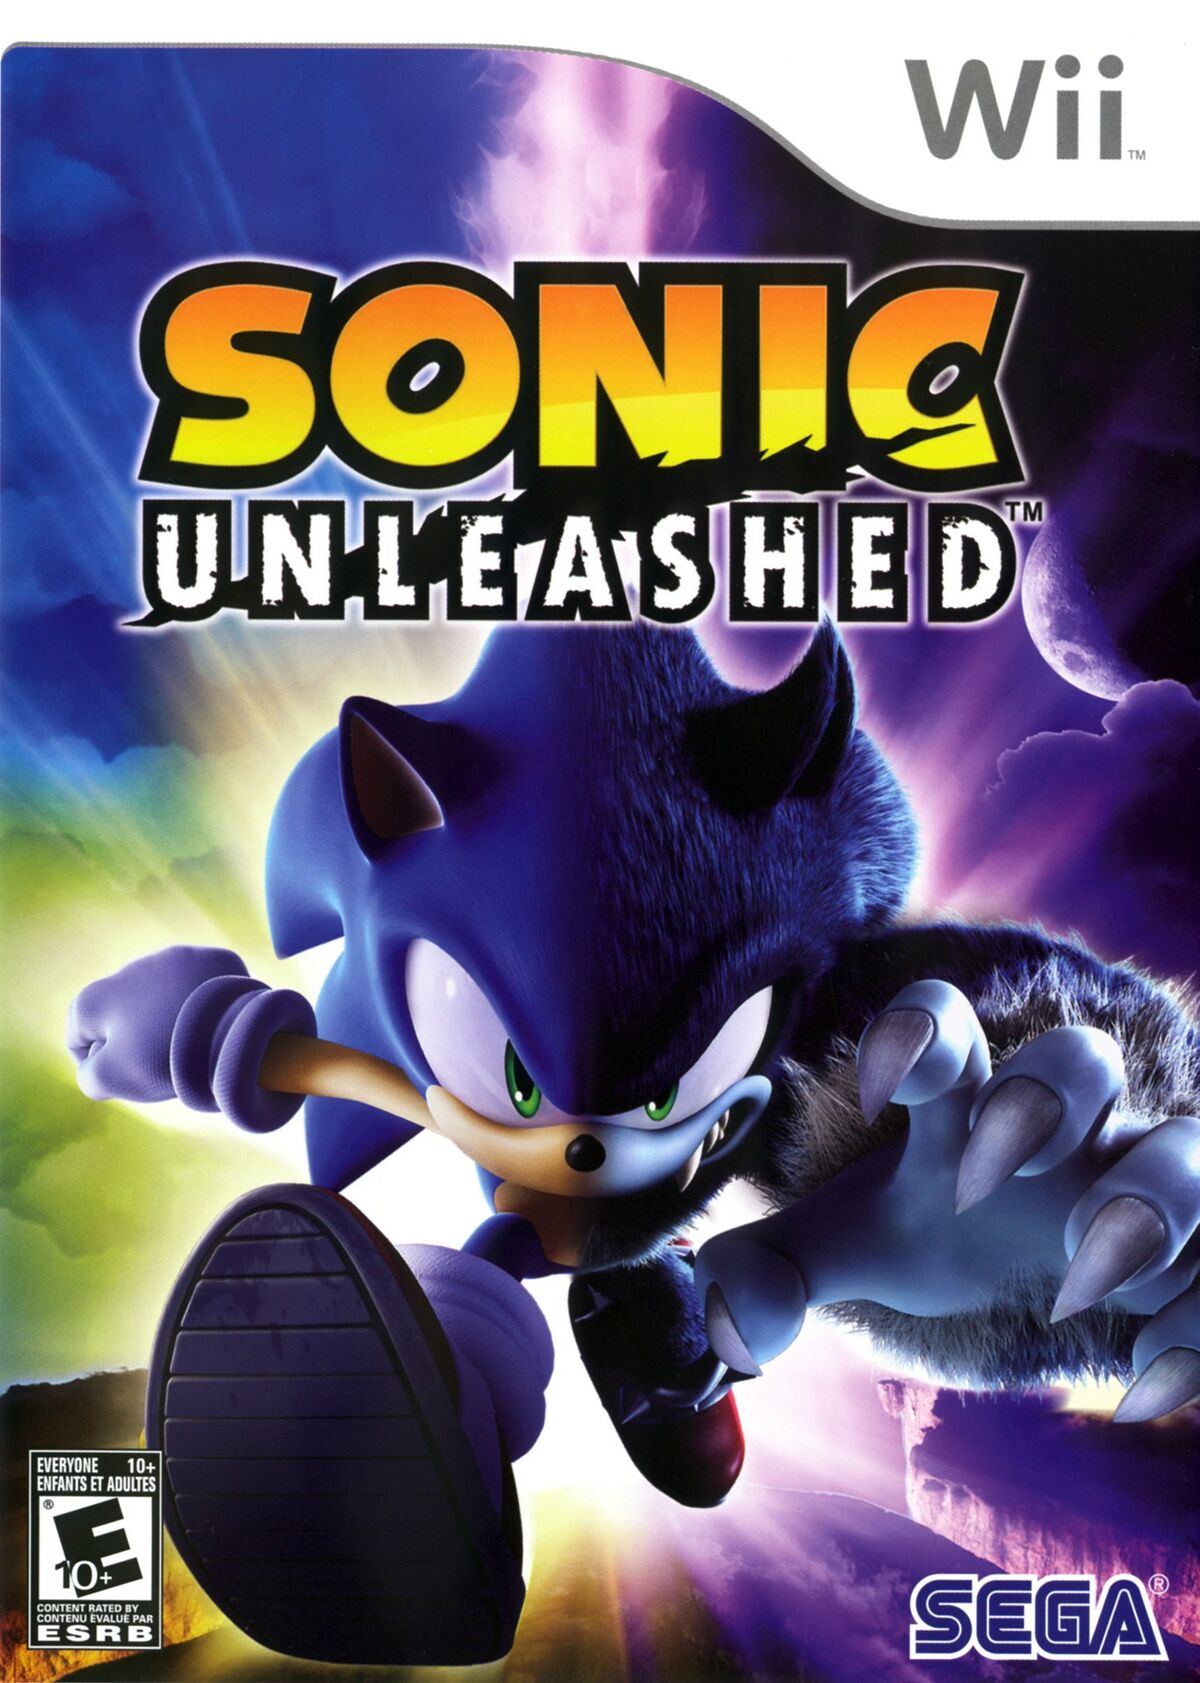 File:Shadow the Hedgehog Multiplayer Fixed.png - Dolphin Emulator Wiki